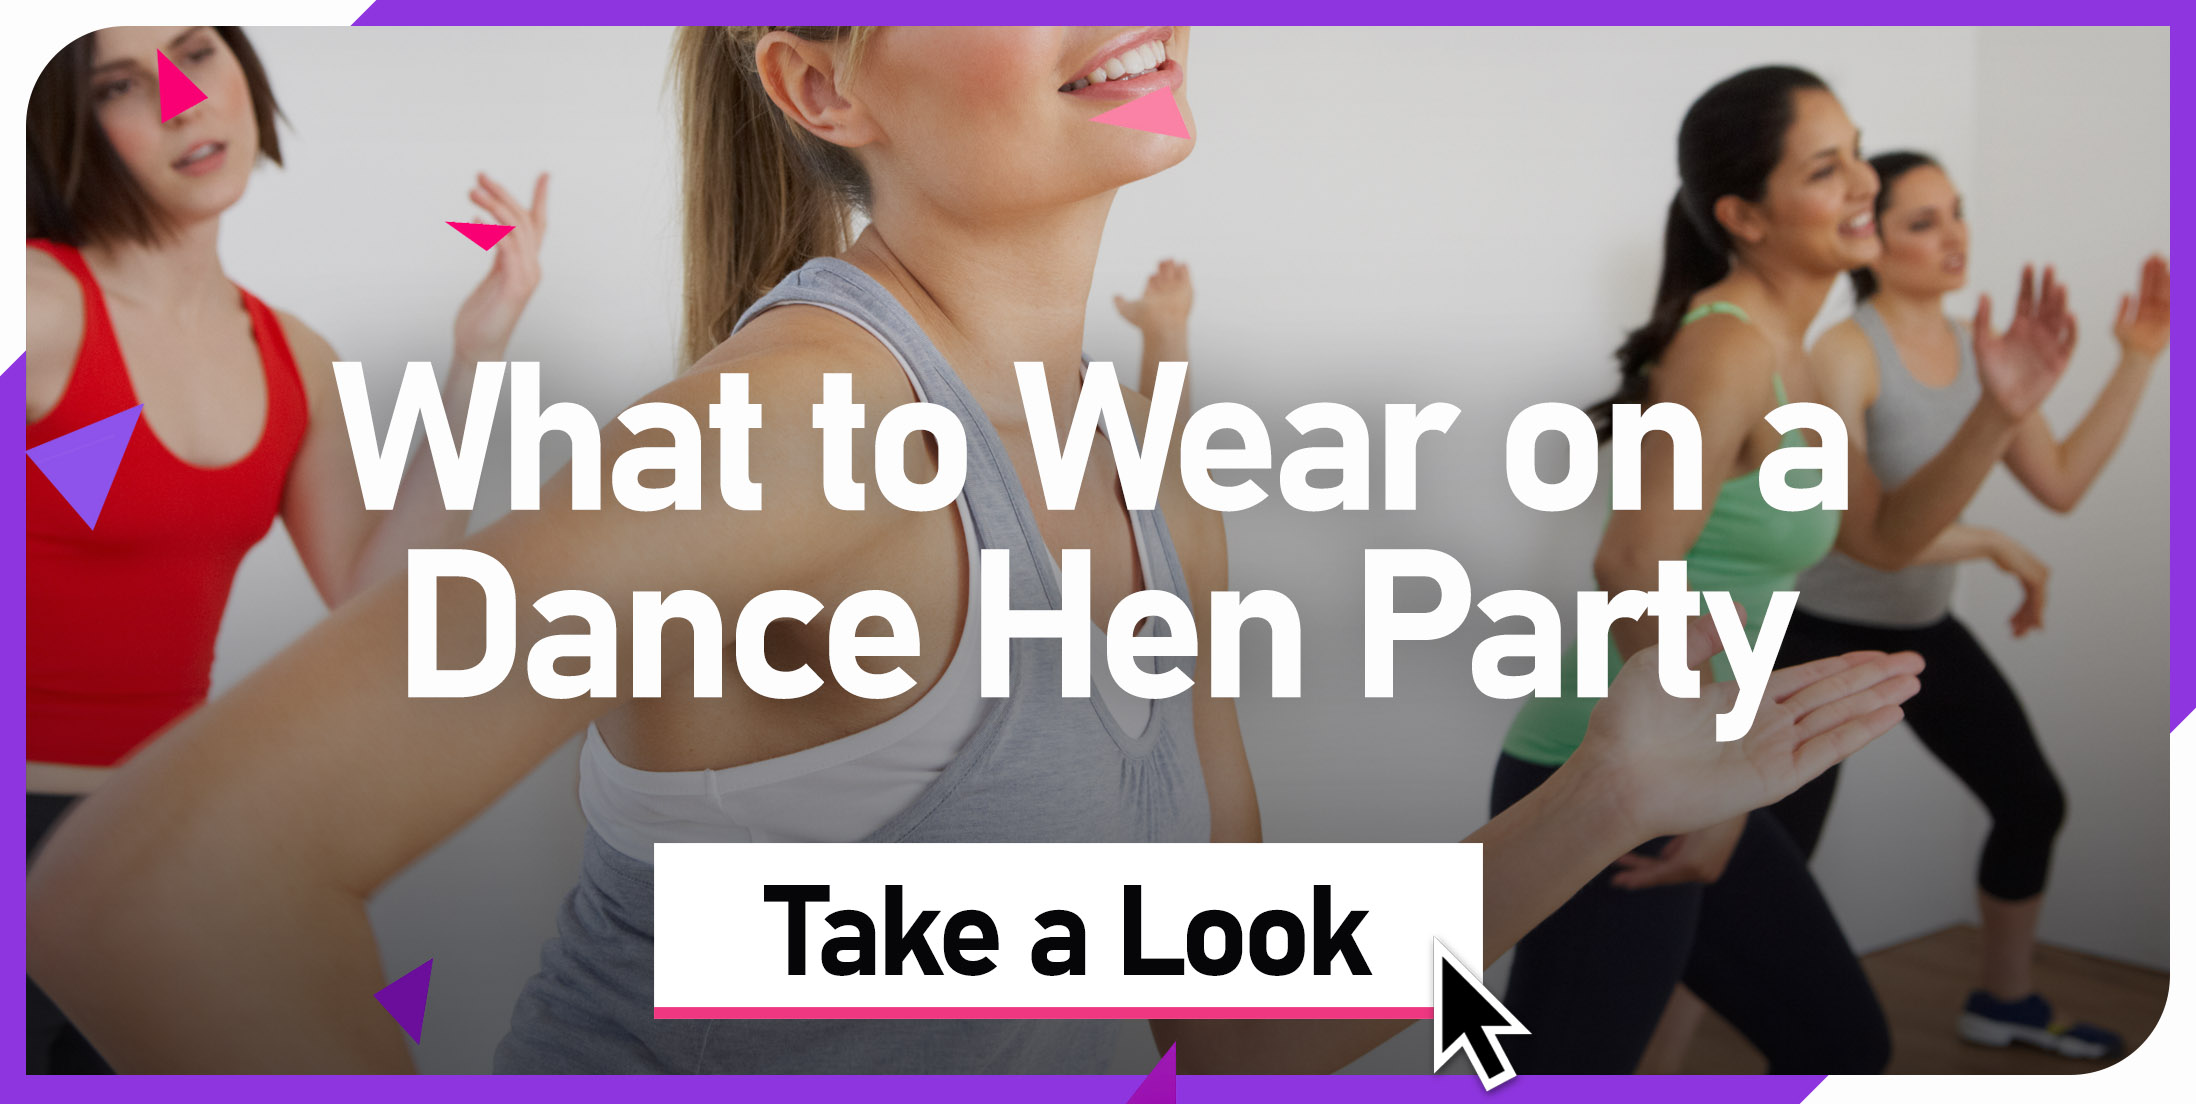 What to Wear on a Dance Hen Party